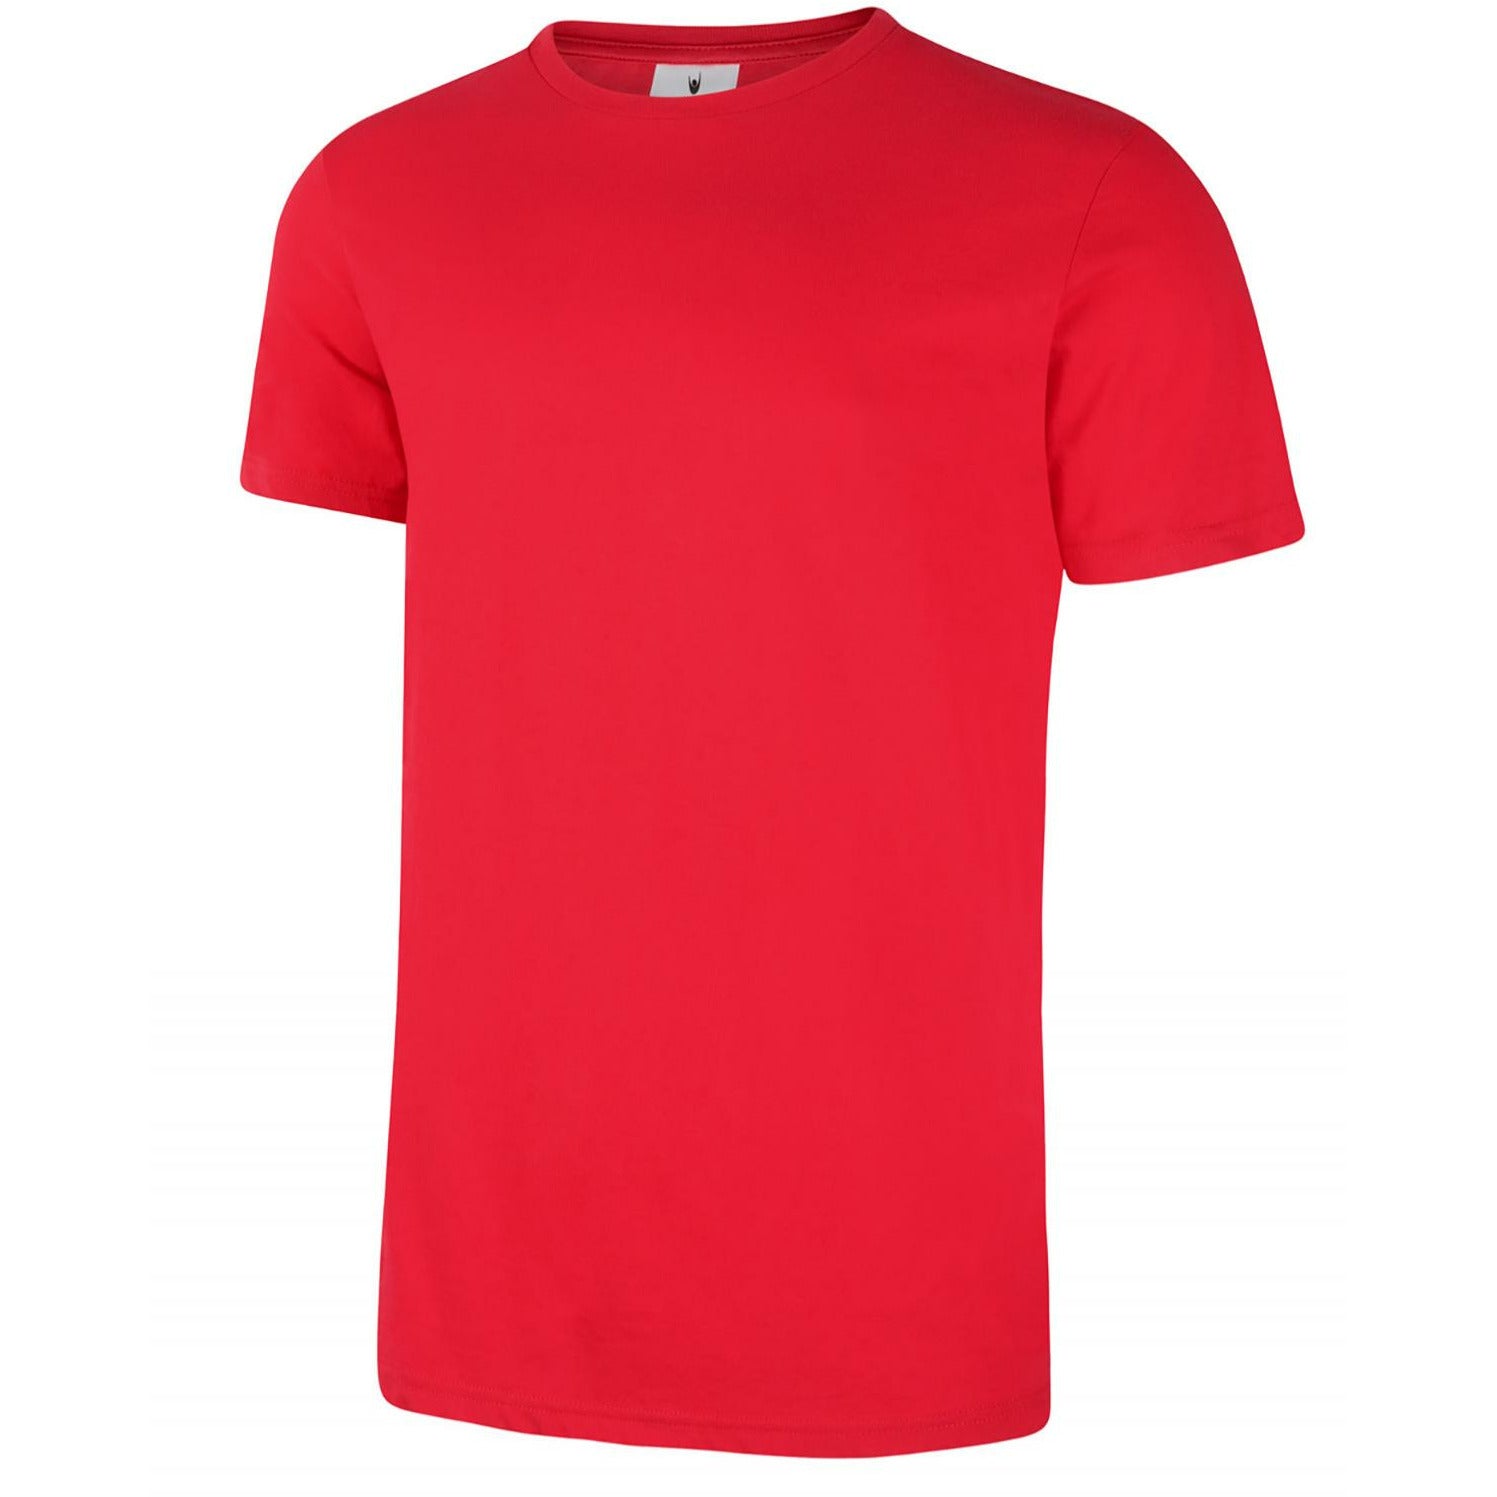 Olympic T-shirt - Red